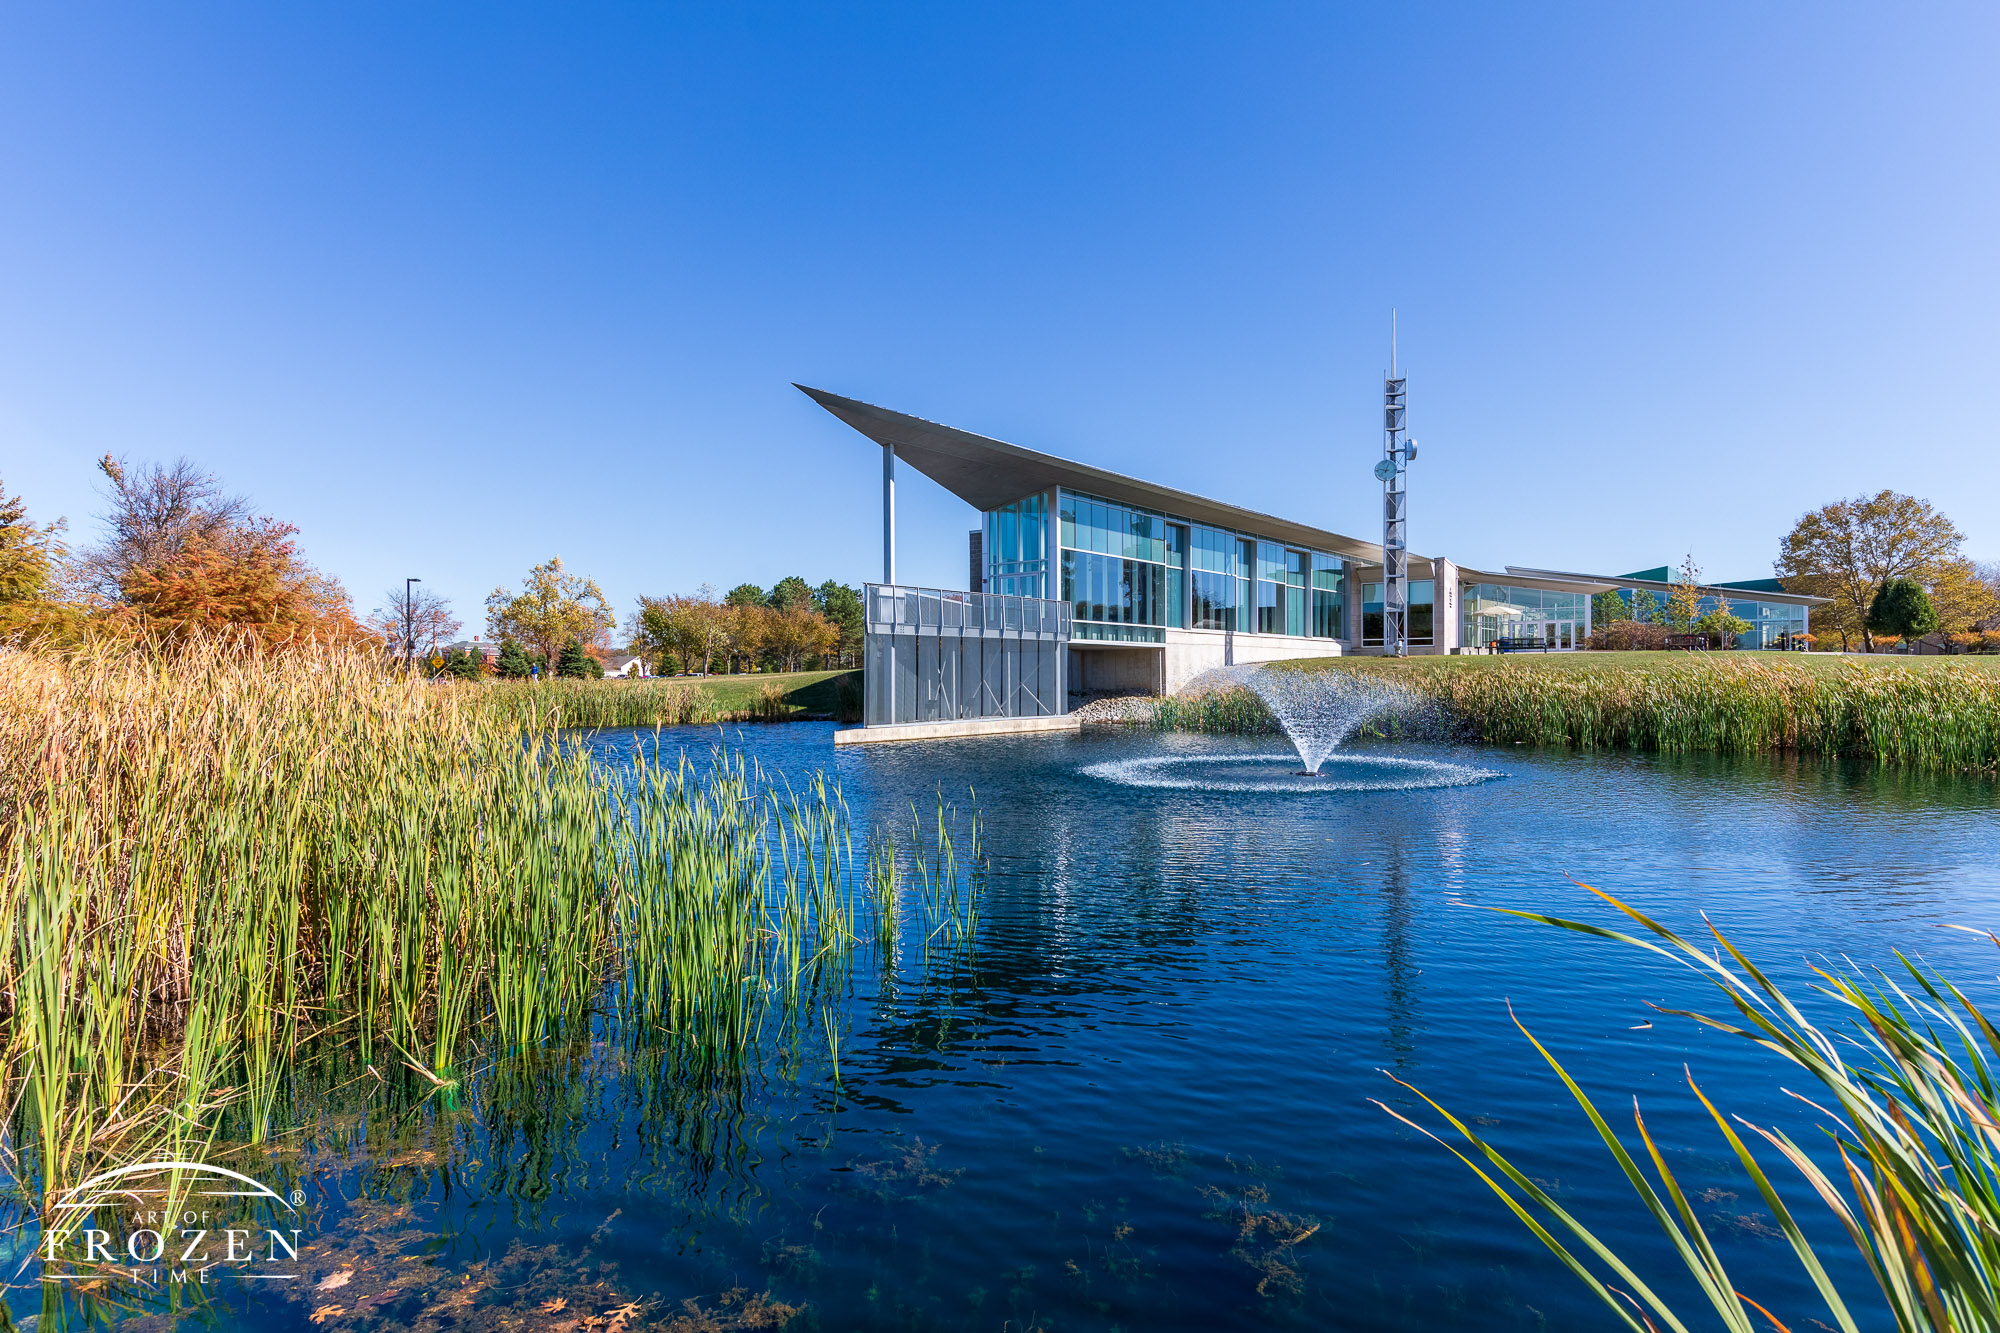 An architecturally pleasing building whose angular construction juts out over a small pond